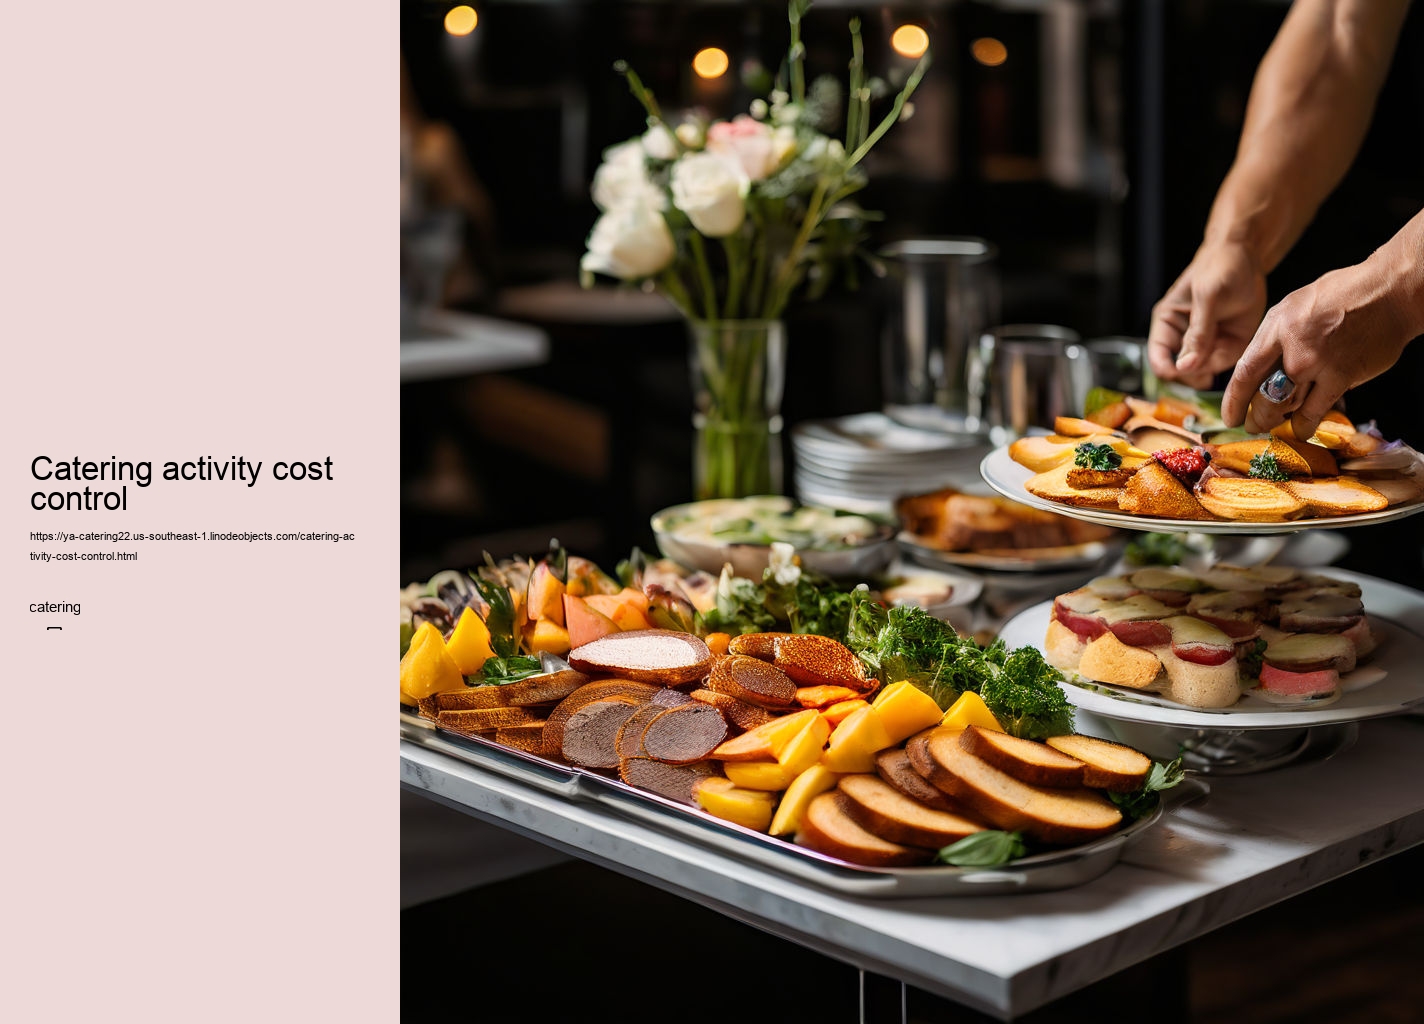 Catering activity cost control